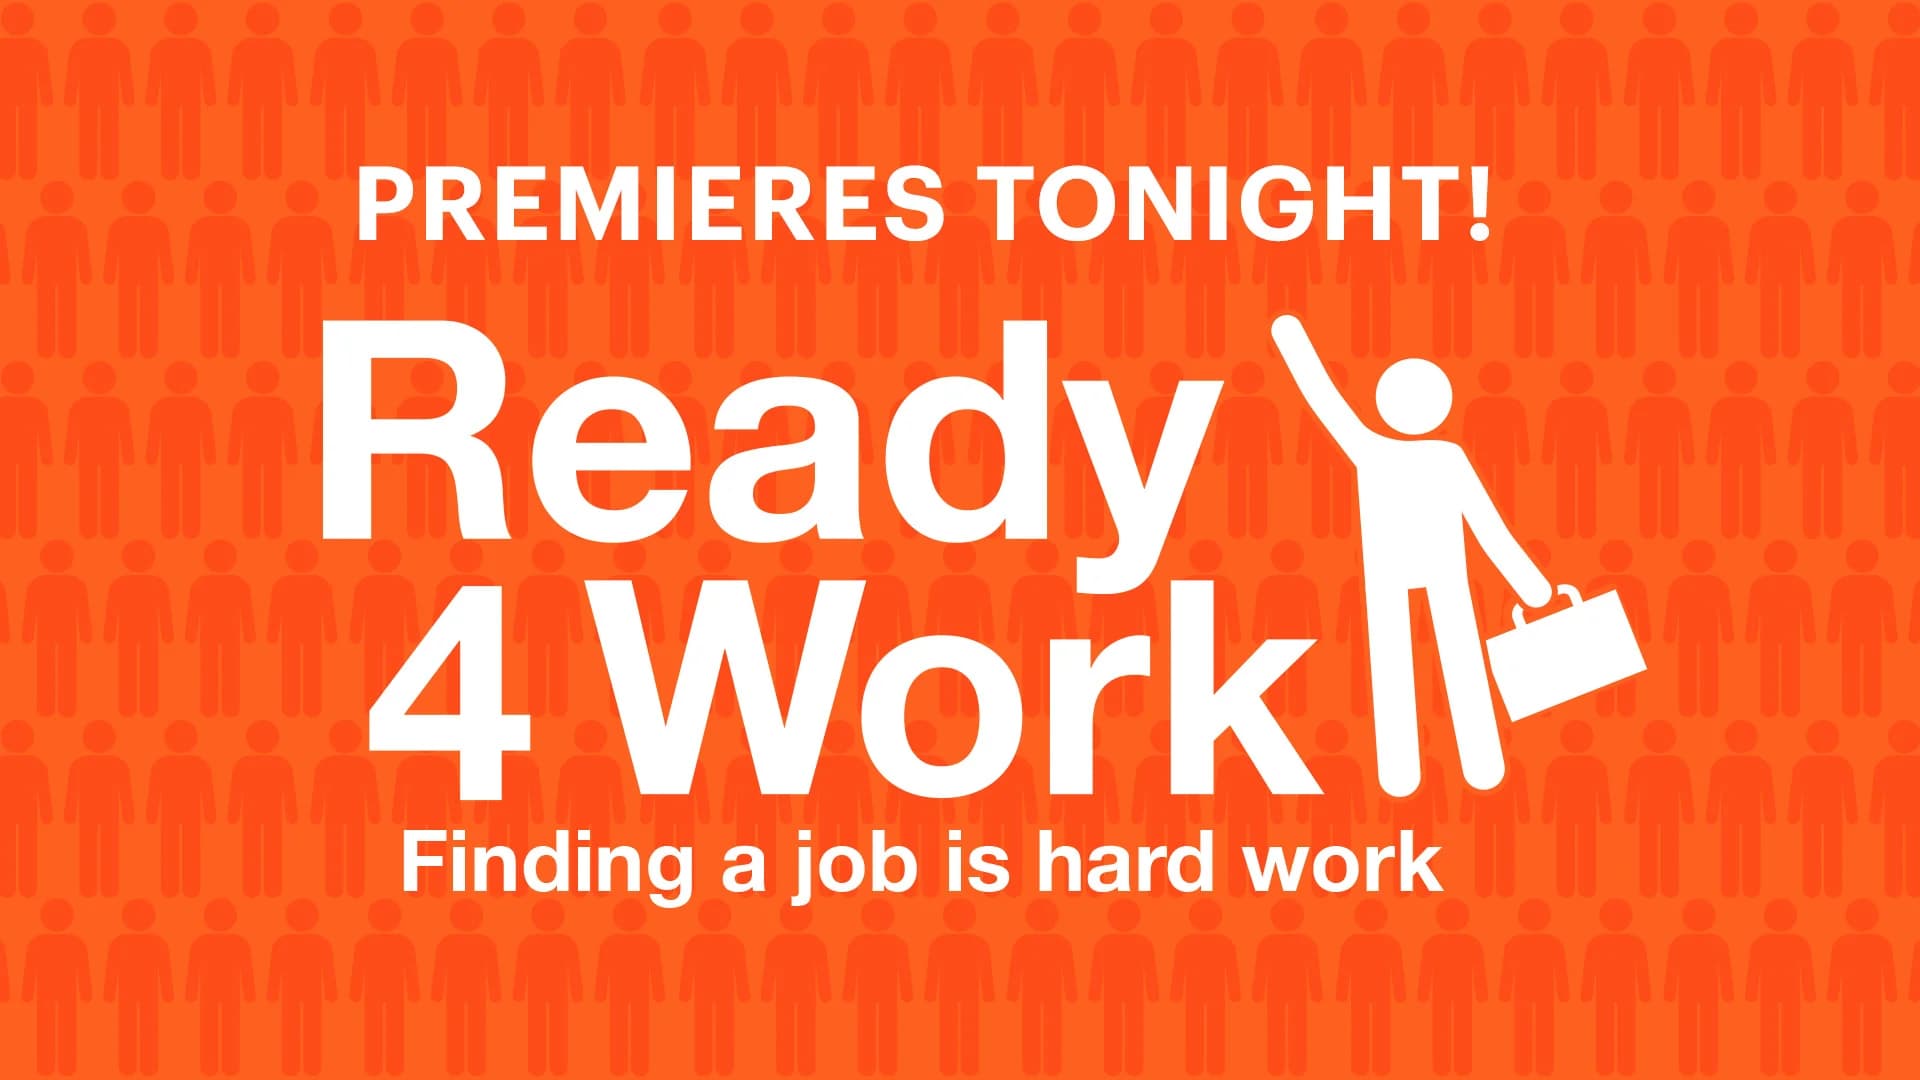 Series Premiere of Ready 4 Work – Tonight at 7:30PM!